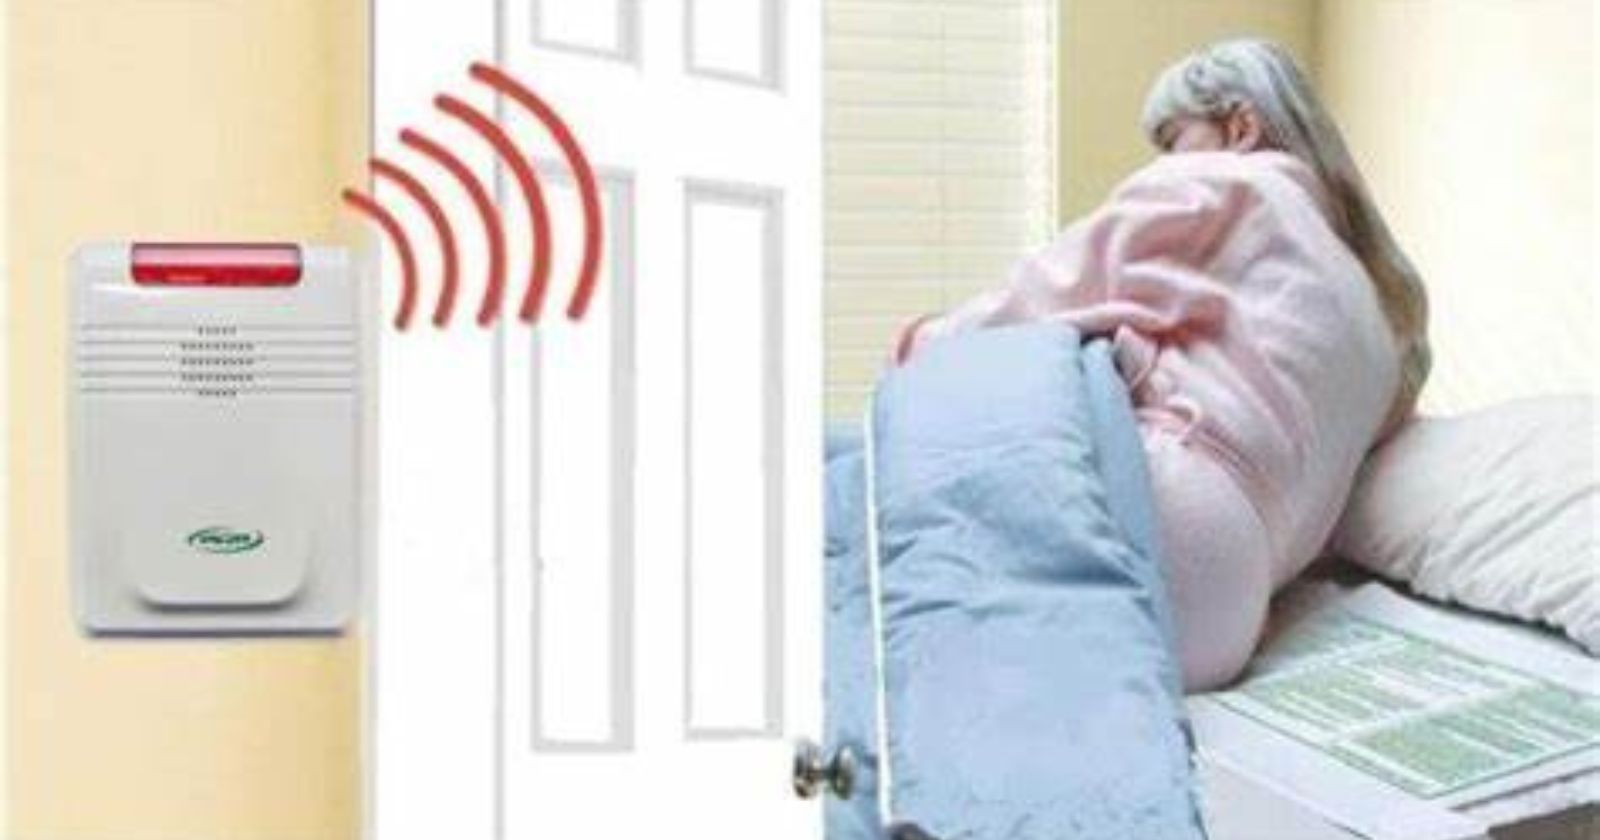 Best Bed Alarms For Seniors